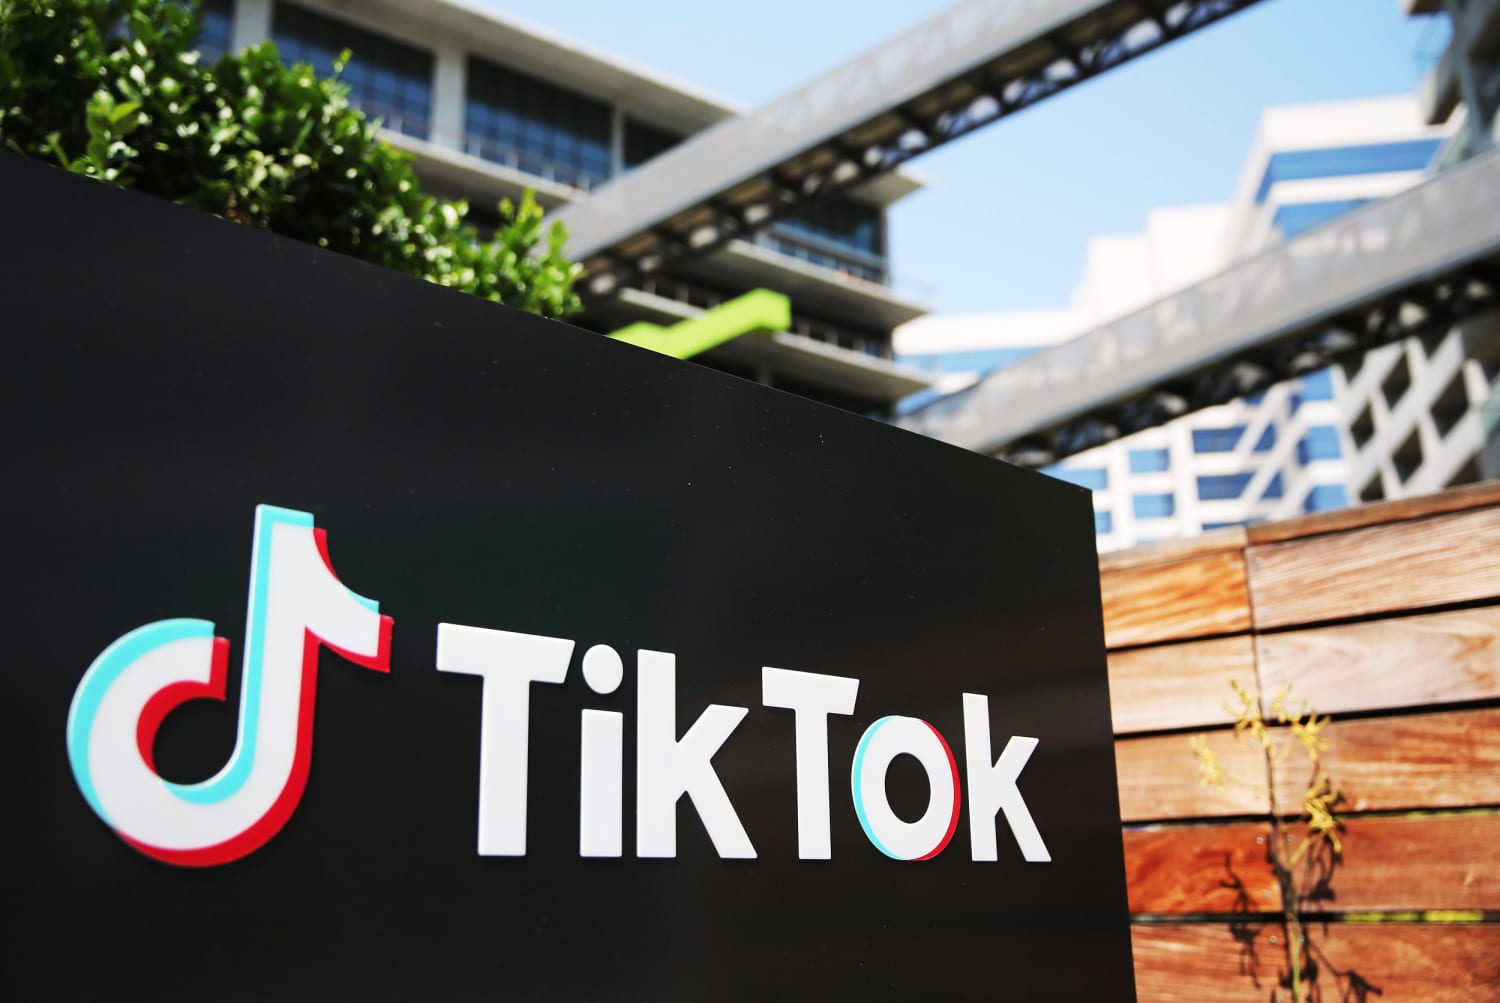 TikTok tries to sell ‘Project Texas’ as it fights for survival in the U.S.